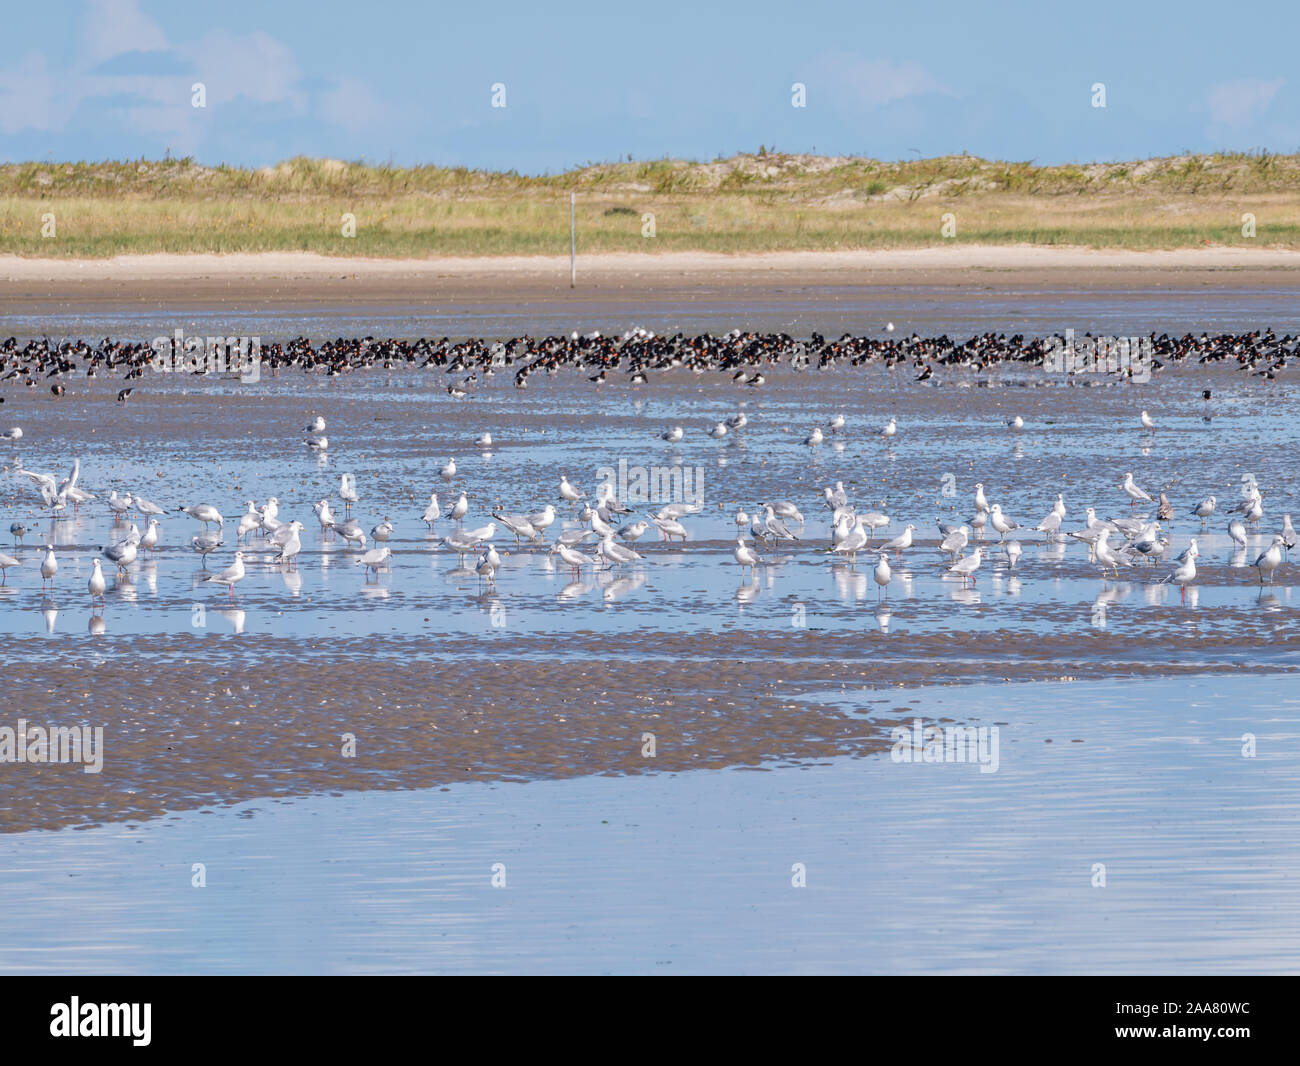 Groups of oystercatchers and seagulls foraging on beach of Schiermonnikoog at low tide of Wadden Sea, Netherlands Stock Photo